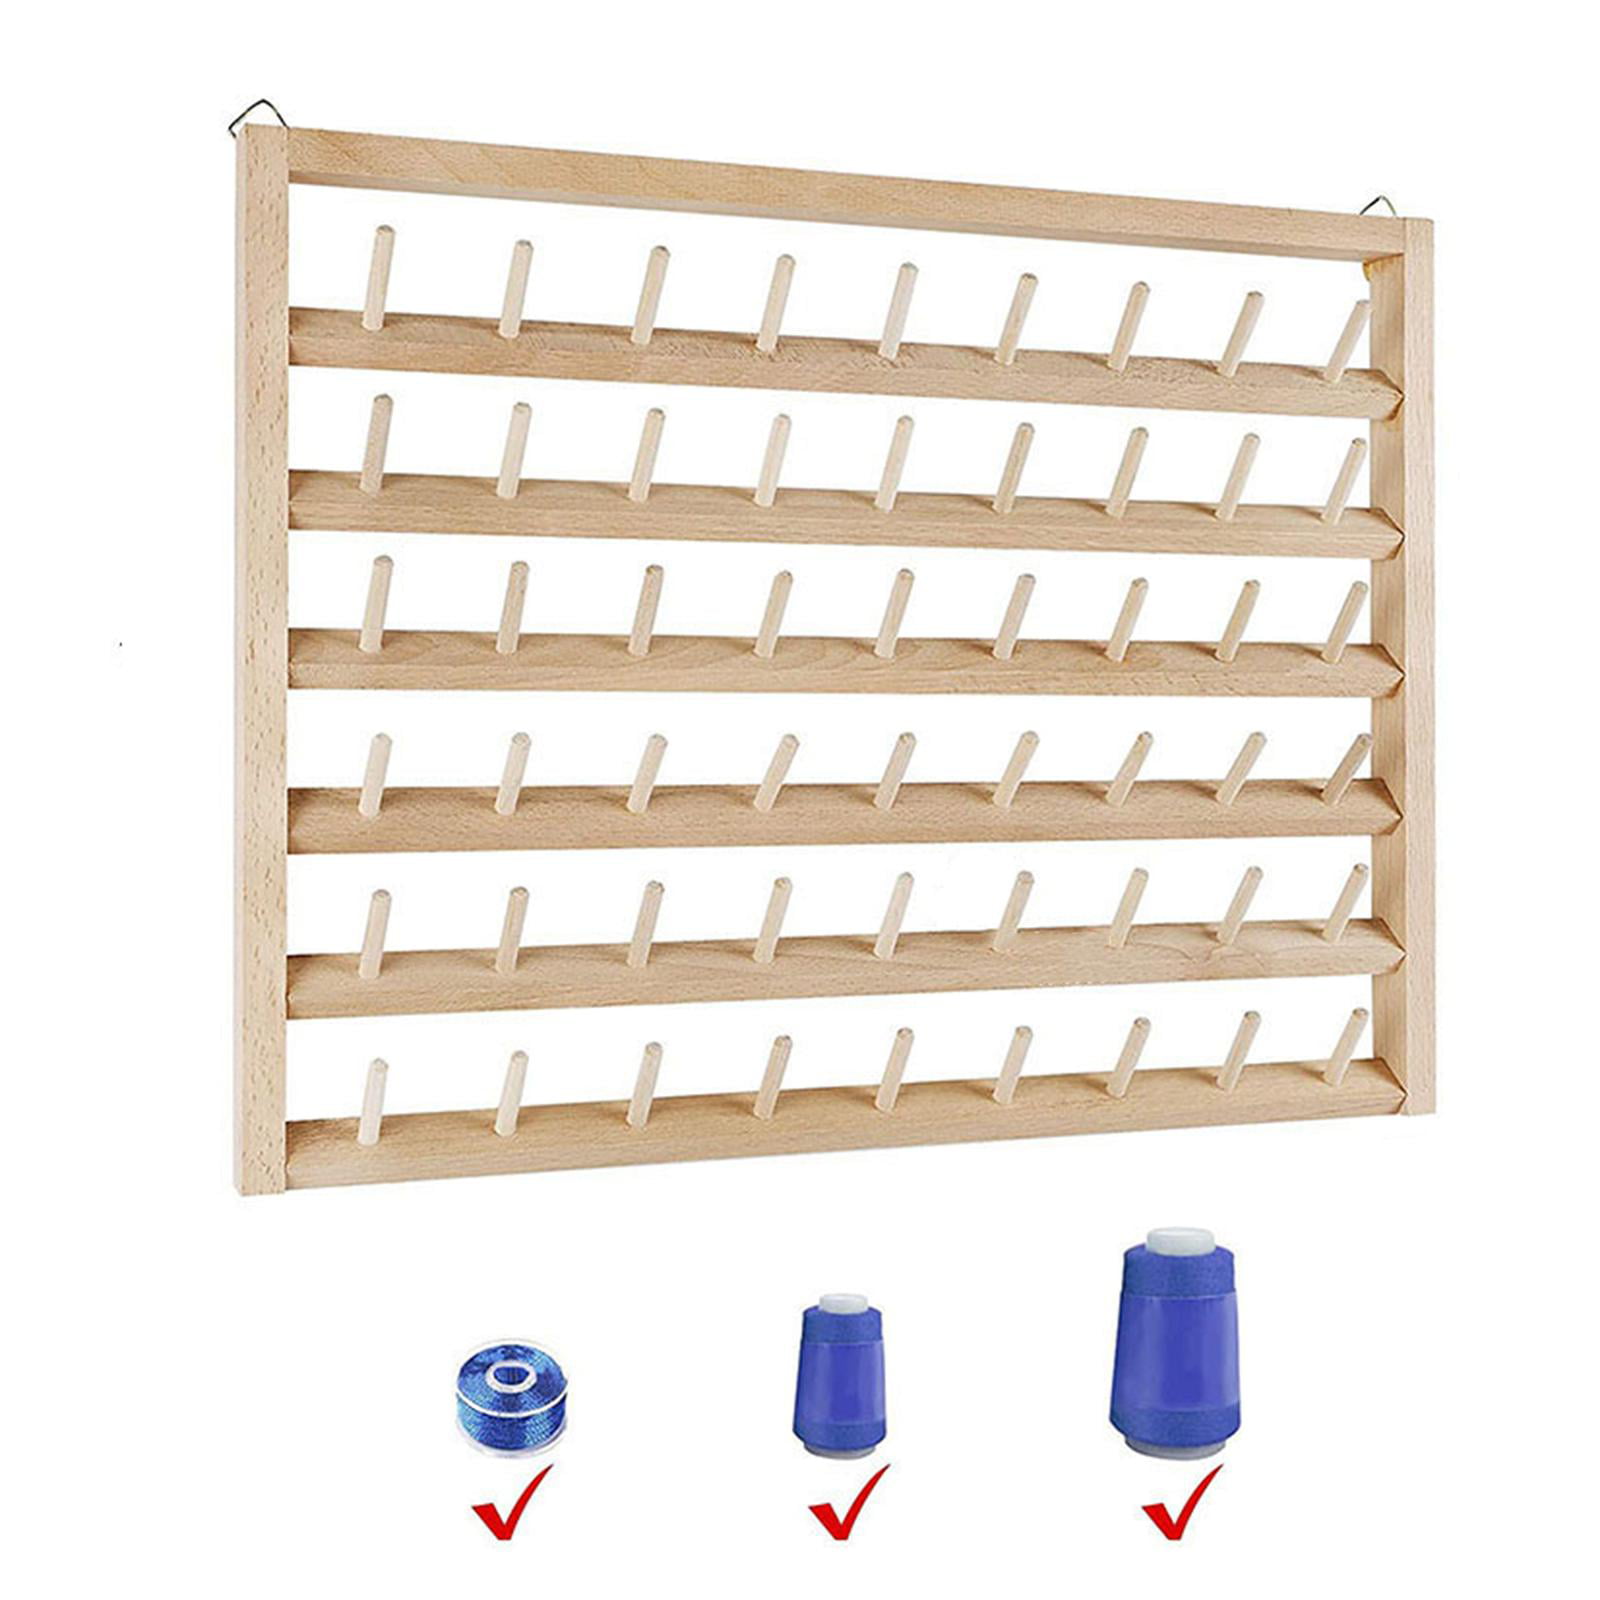  Thread Holder Wall Mount 54 Spools Sewing Thread Rack  Embroidery Thread Organizer Rack Sewing Thread Holder White with Hanging  Tools for Quilting Braiding Hair Metal 2 Pack